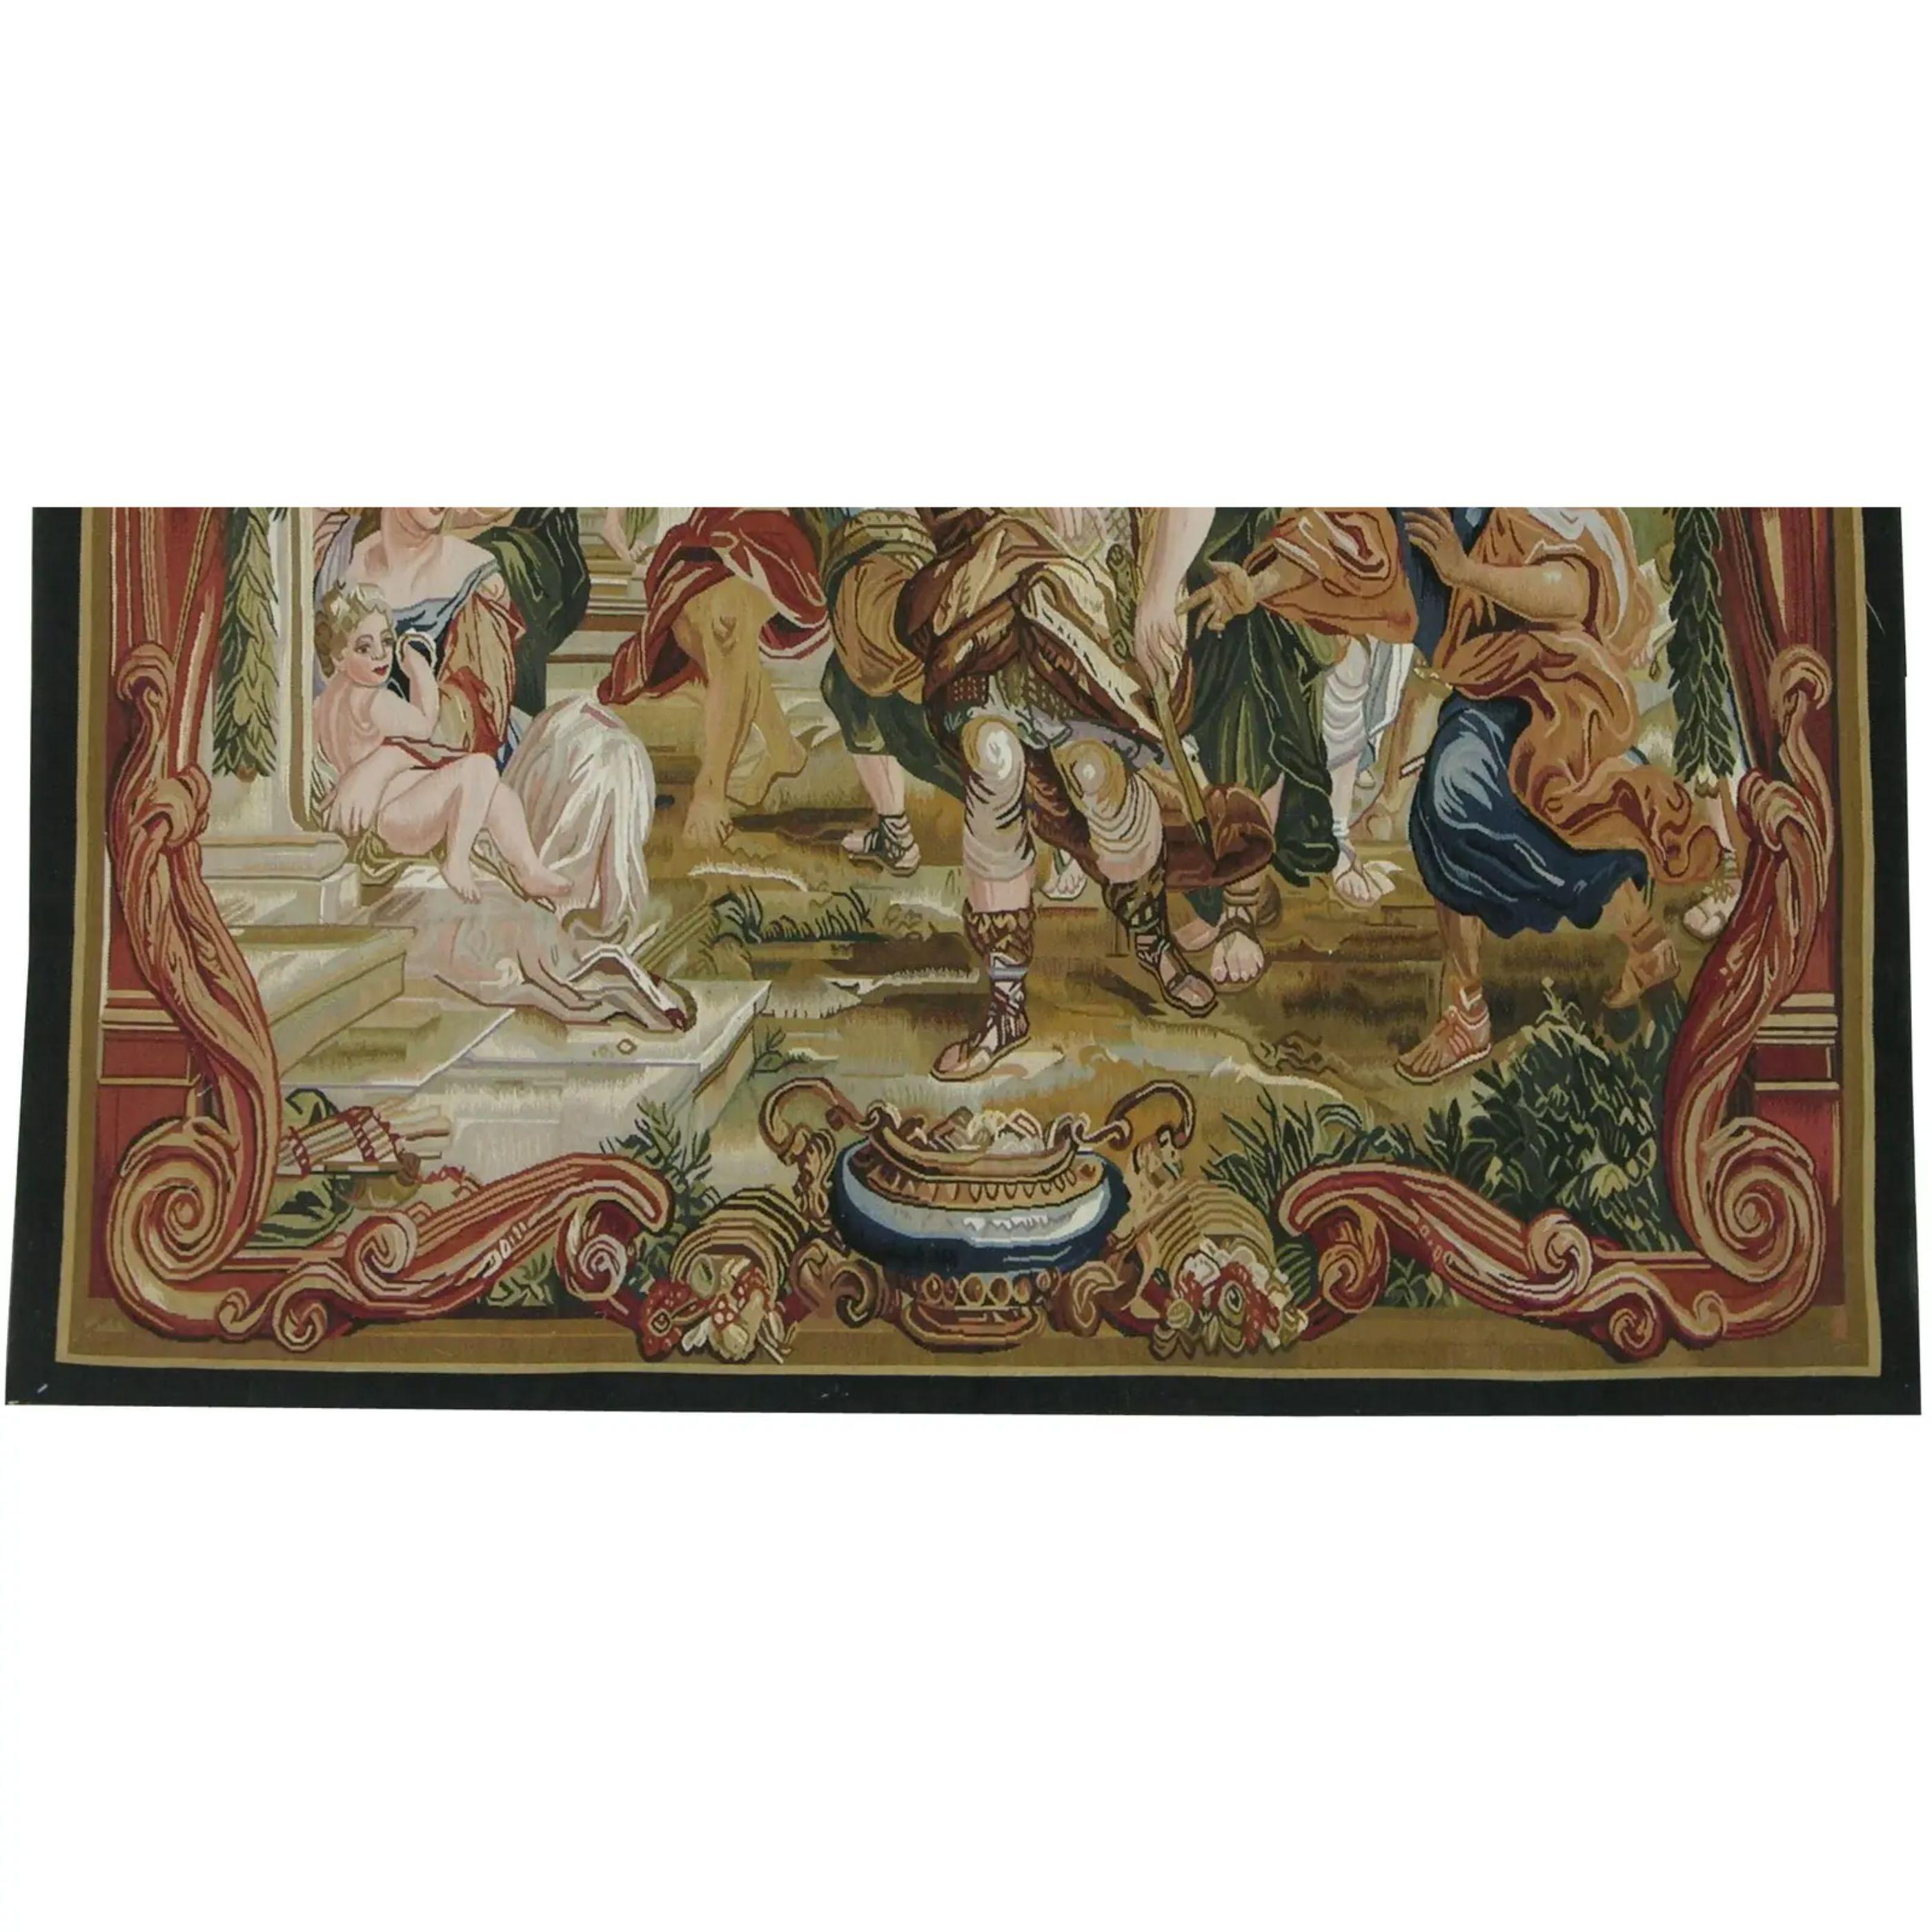 Unknown Vintage Tapestry Depicting Royalty 5X4.10 For Sale